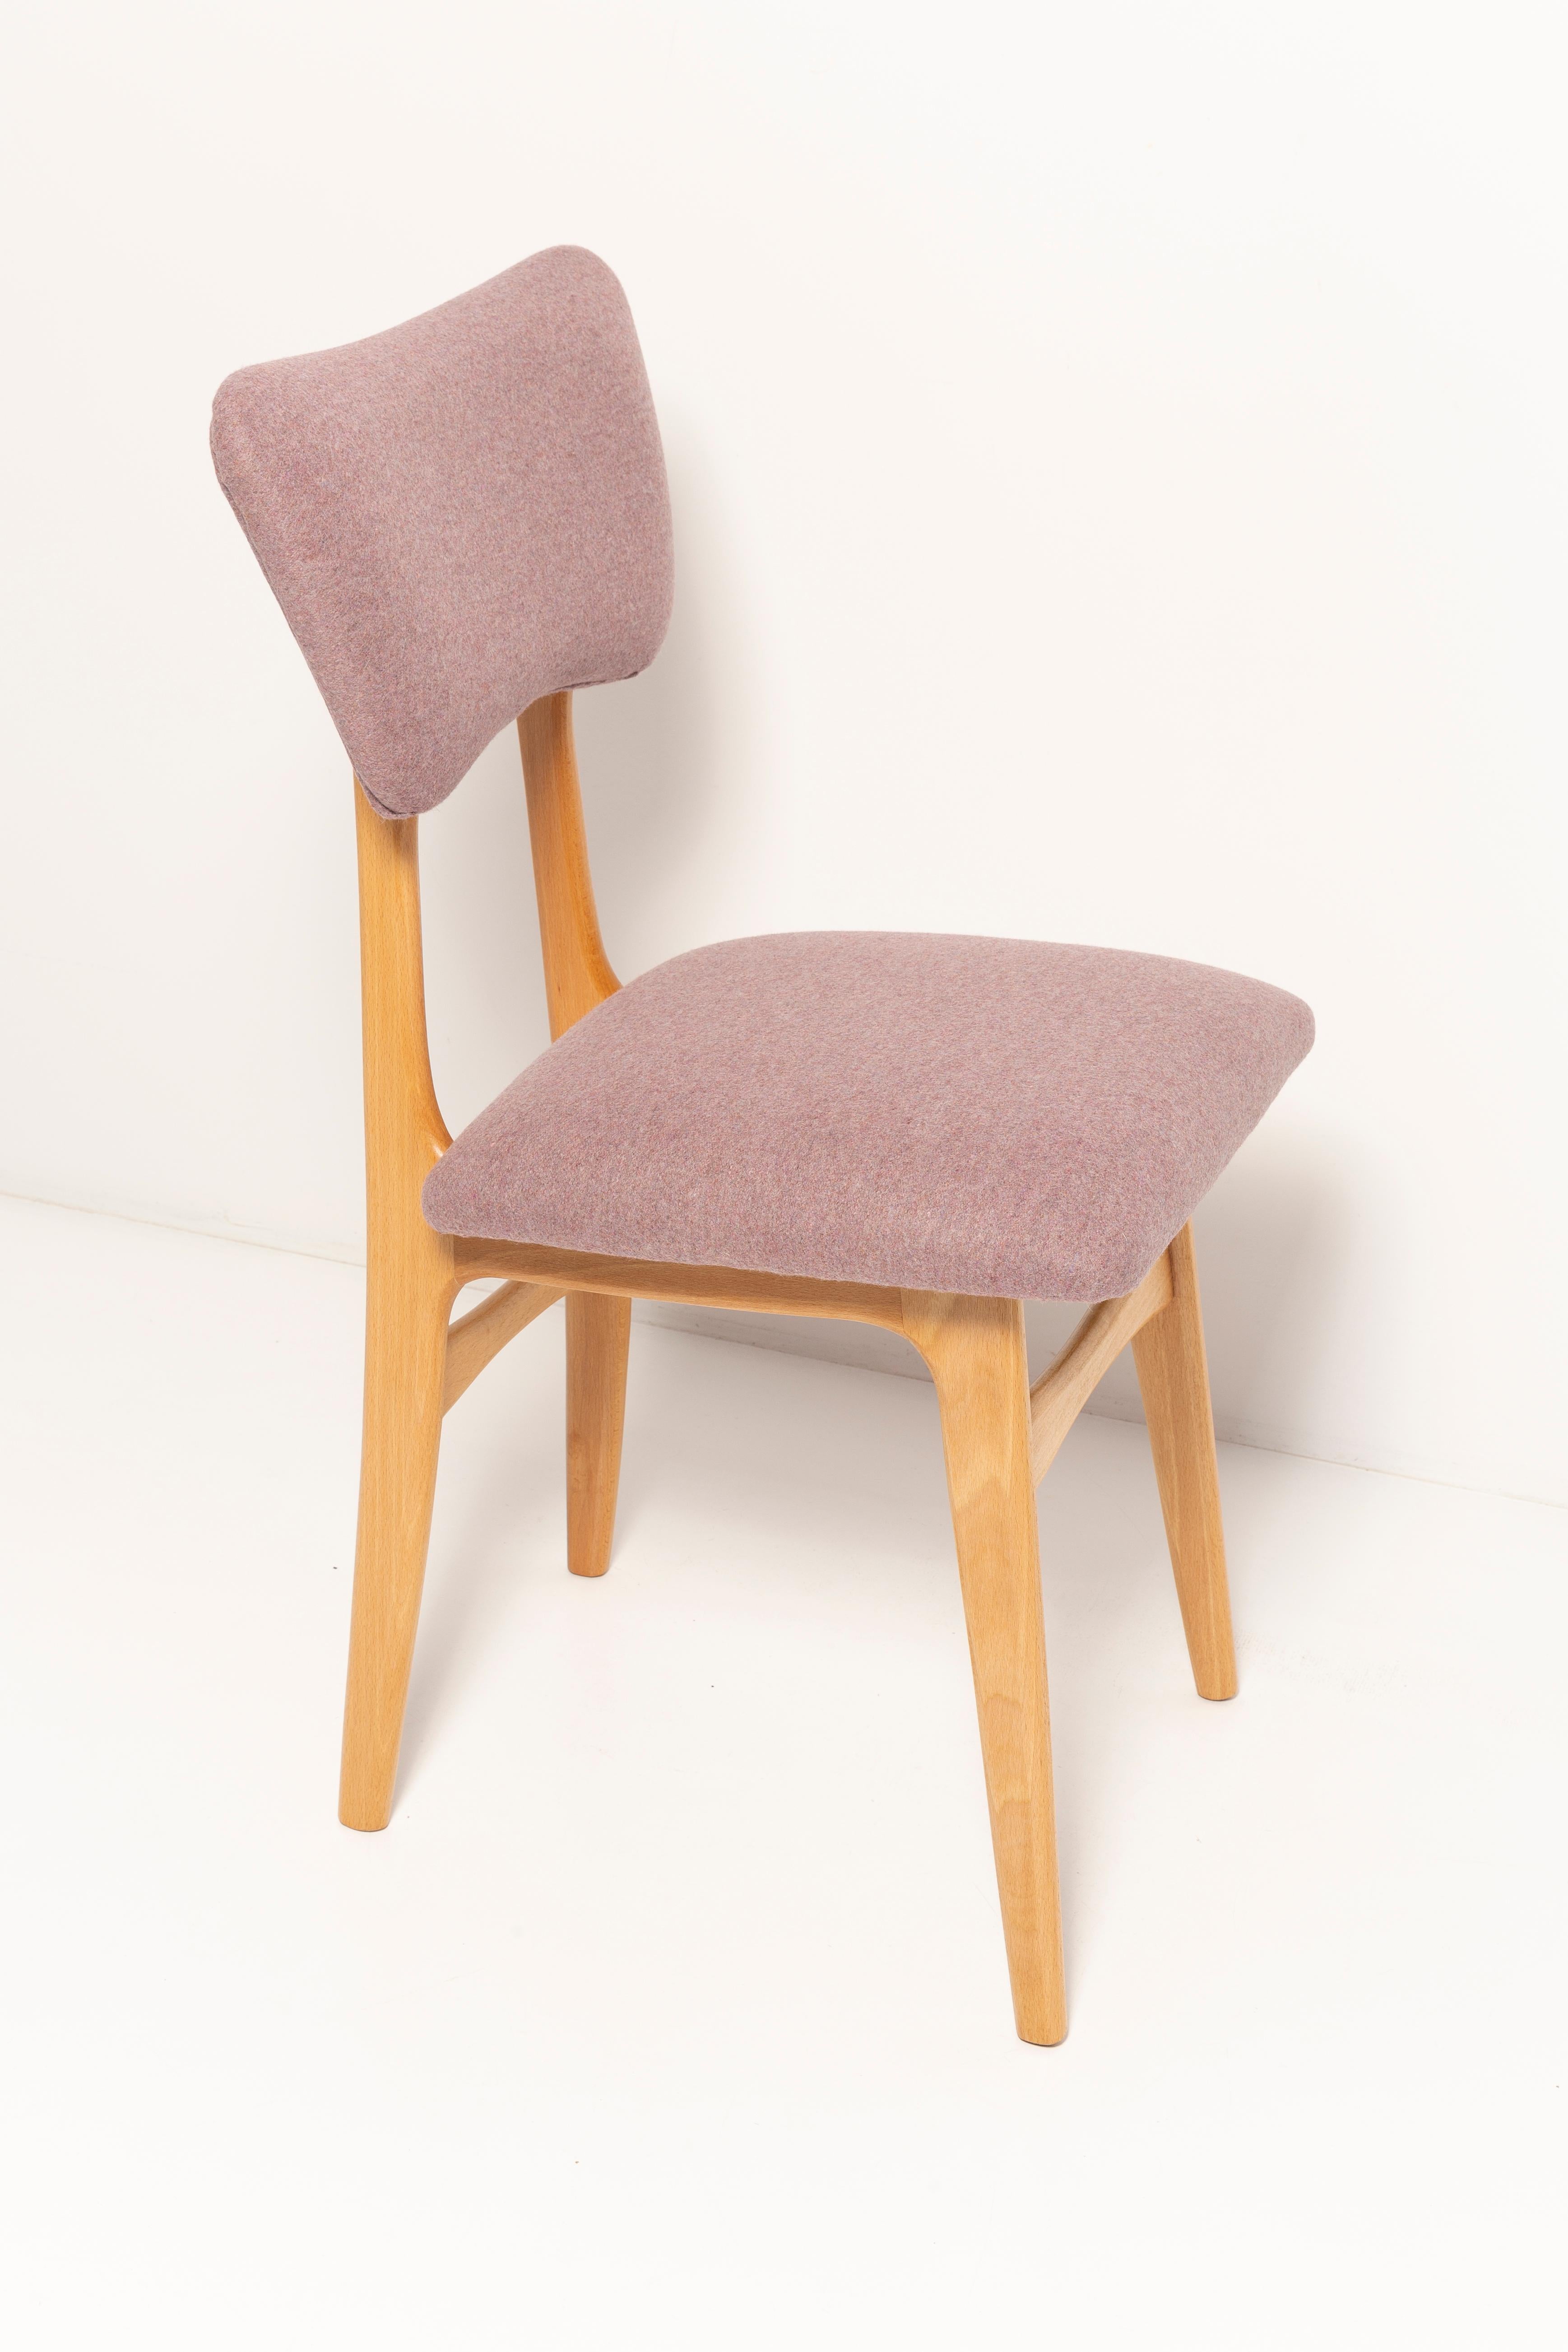 Hand-Crafted Nine 20th Century Butterfly Dining Chairs, Pink Wool, Light Wood, Europe, 1960s For Sale